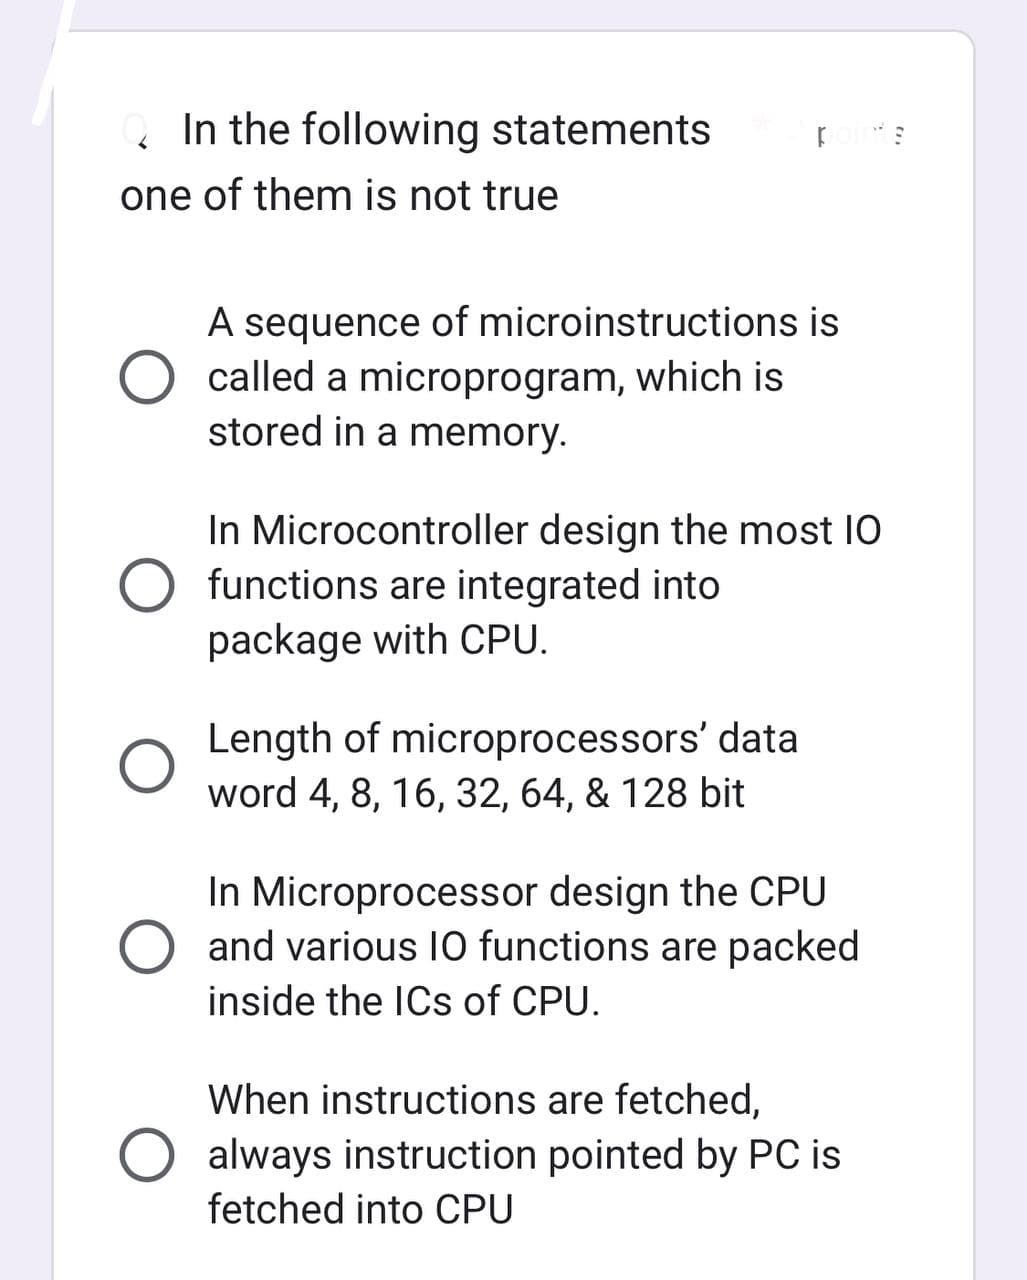 In the following statements
one of them is not true
A sequence of microinstructions is
called a microprogram, which is
stored in a memory.
In Microcontroller design the most 10
O functions are integrated into
package with CPU.
Length of microprocessors' data
word 4, 8, 16, 32, 64, & 128 bit
In Microprocessor design the CPU
and various 10 functions are packed
inside the ICs of CPU.
When instructions are fetched,
always instruction pointed by PC is
fetched into CPU